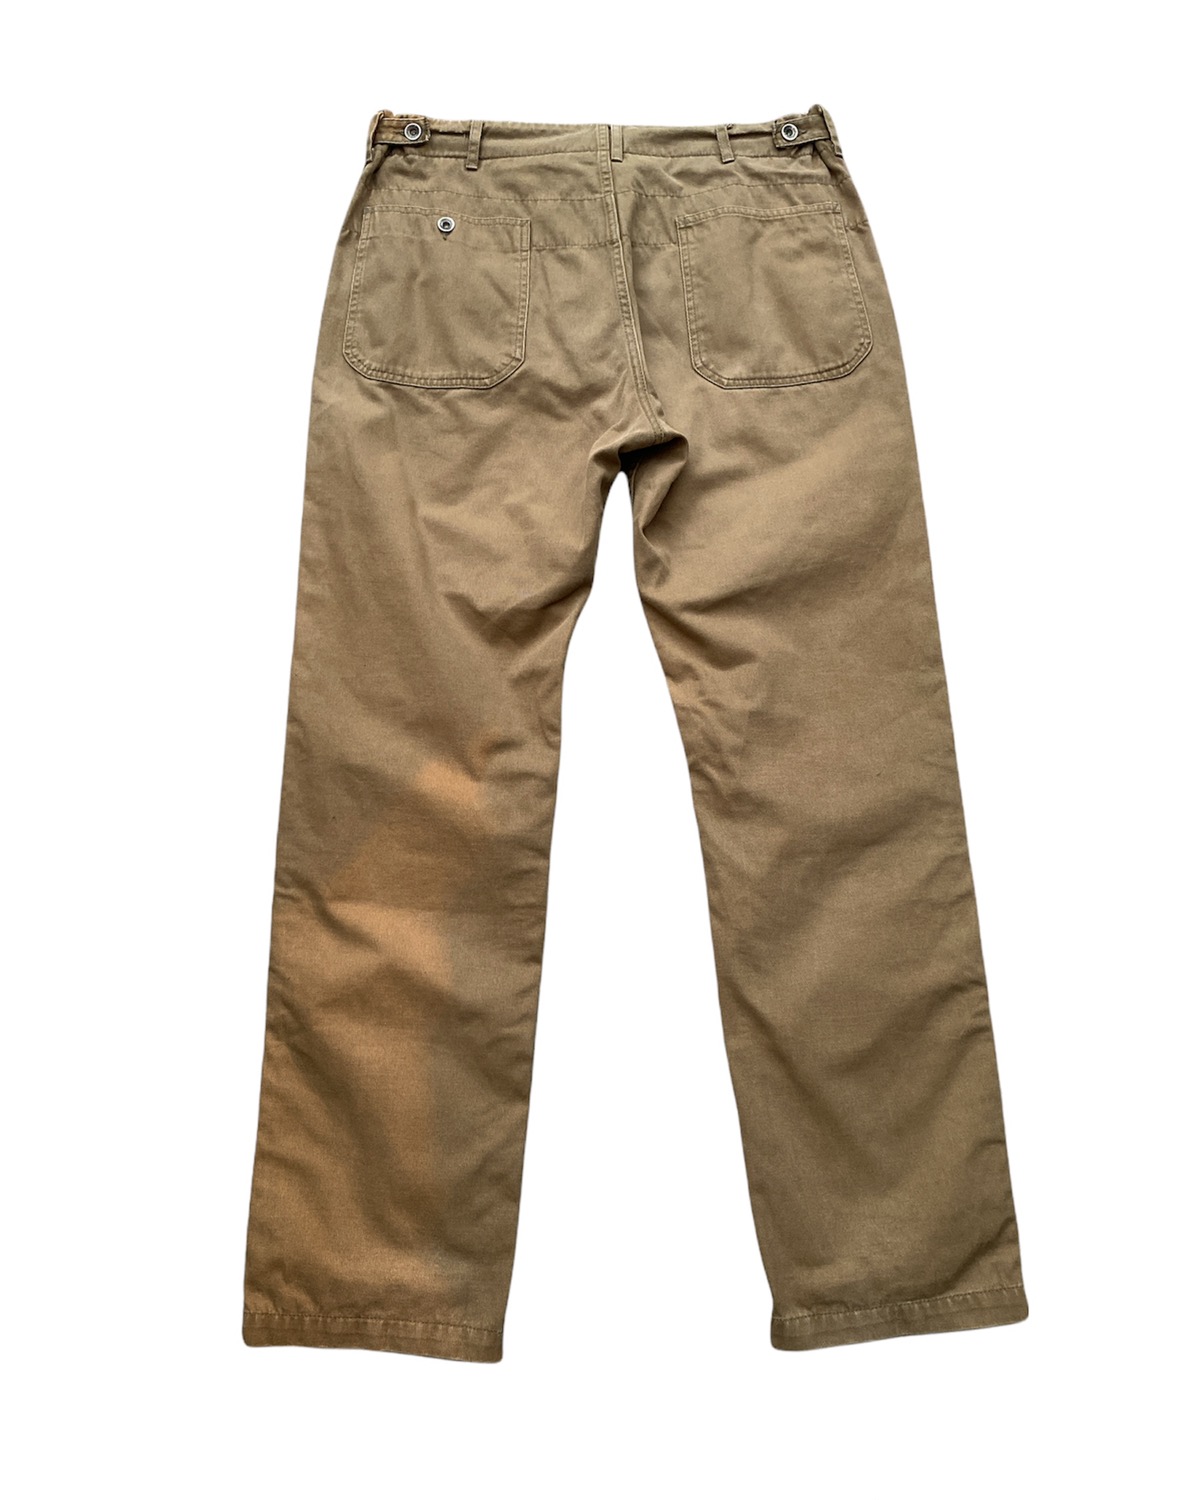 Vintage Engineered Garment Nepenthes Cargo Pants - 2